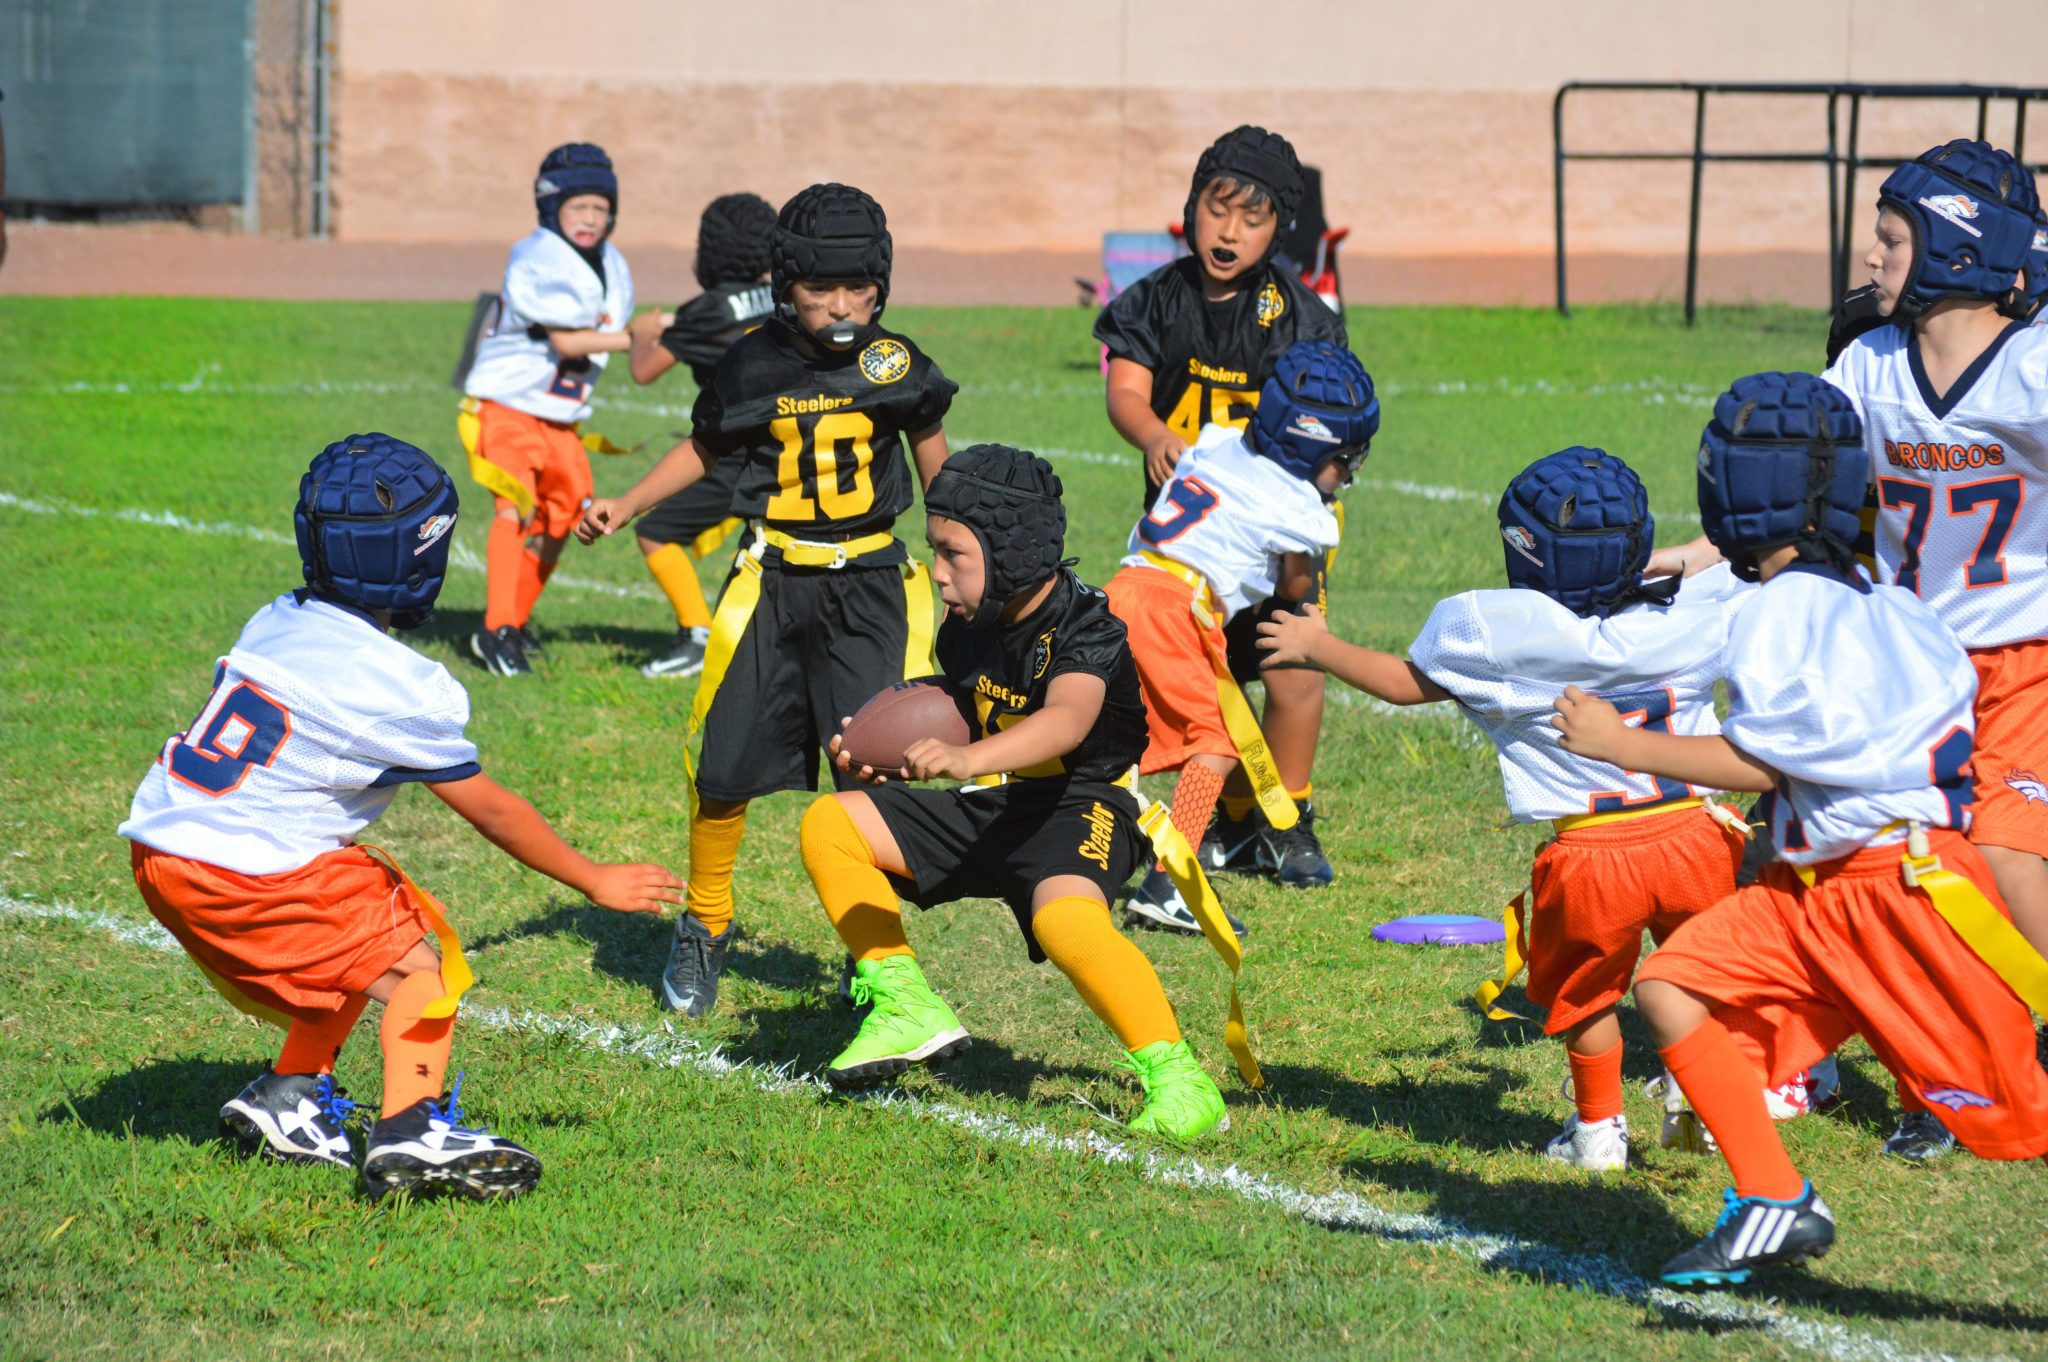 Youth Football: Broncos over Steelers in 8U Flag